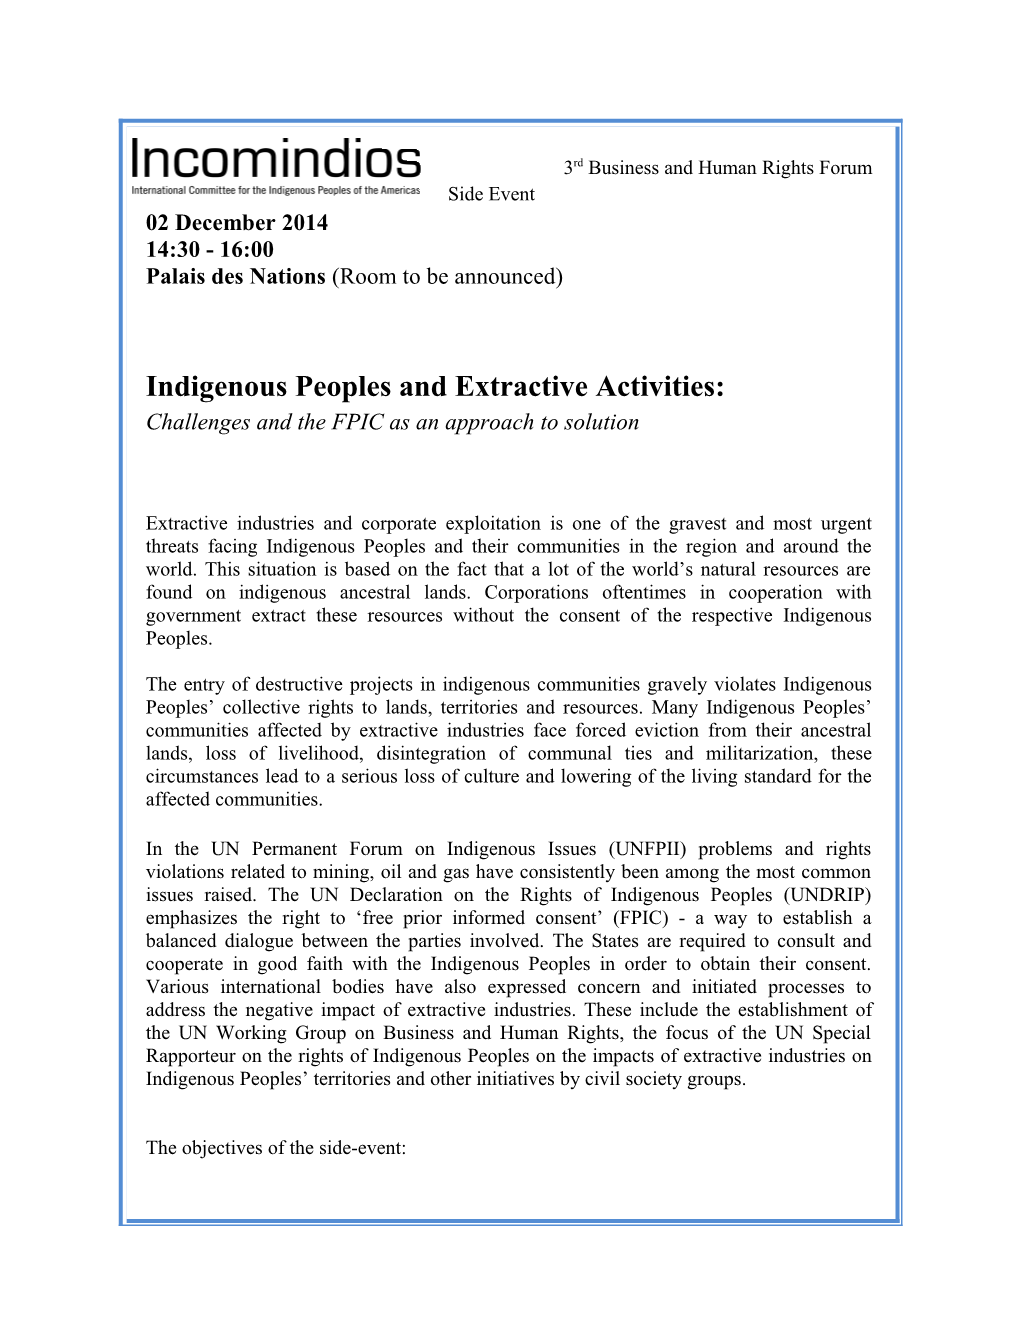 Indigenous Peoples and Extractive Activities